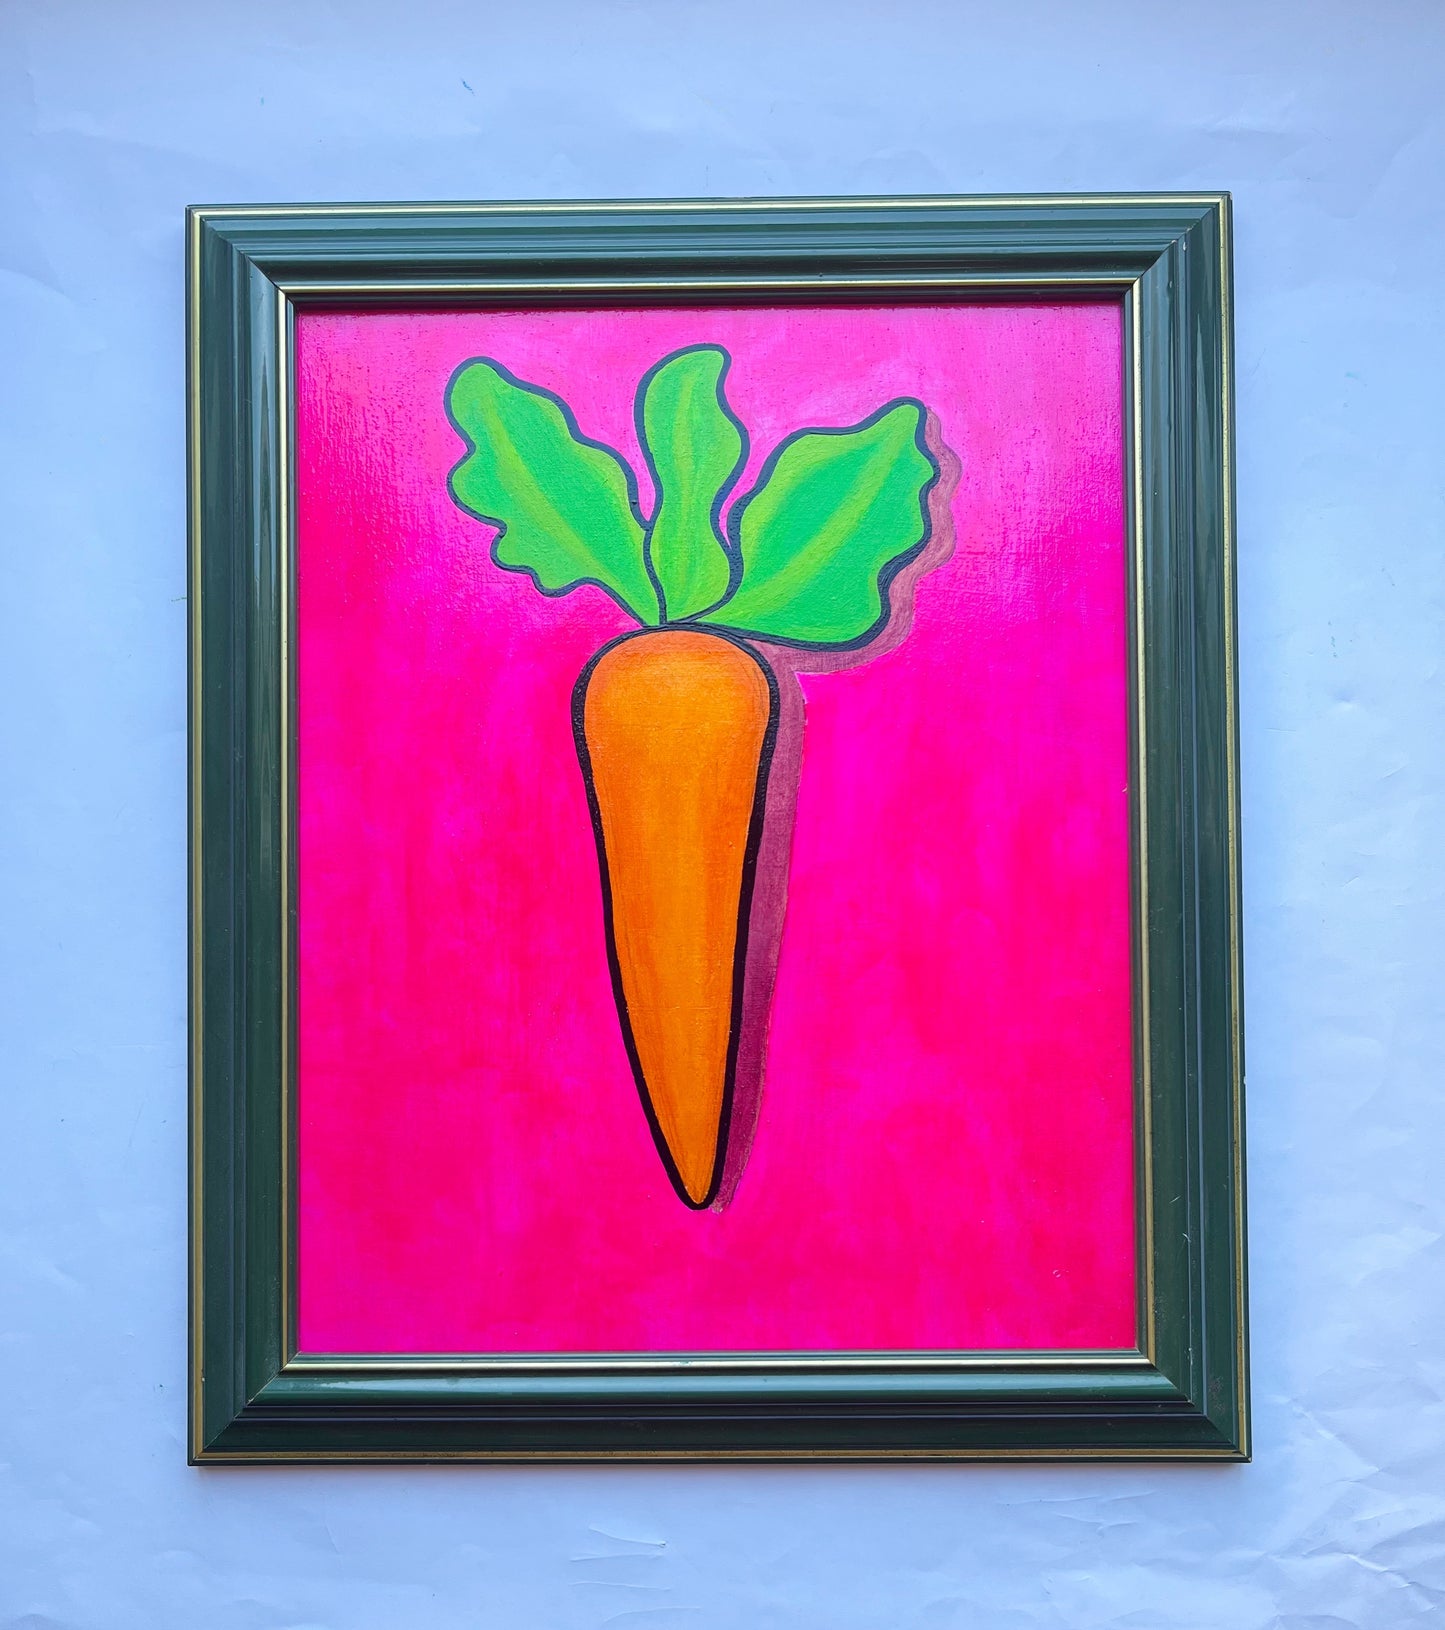 An oil painting of an orange carrot on a pink background in a thrifted frame